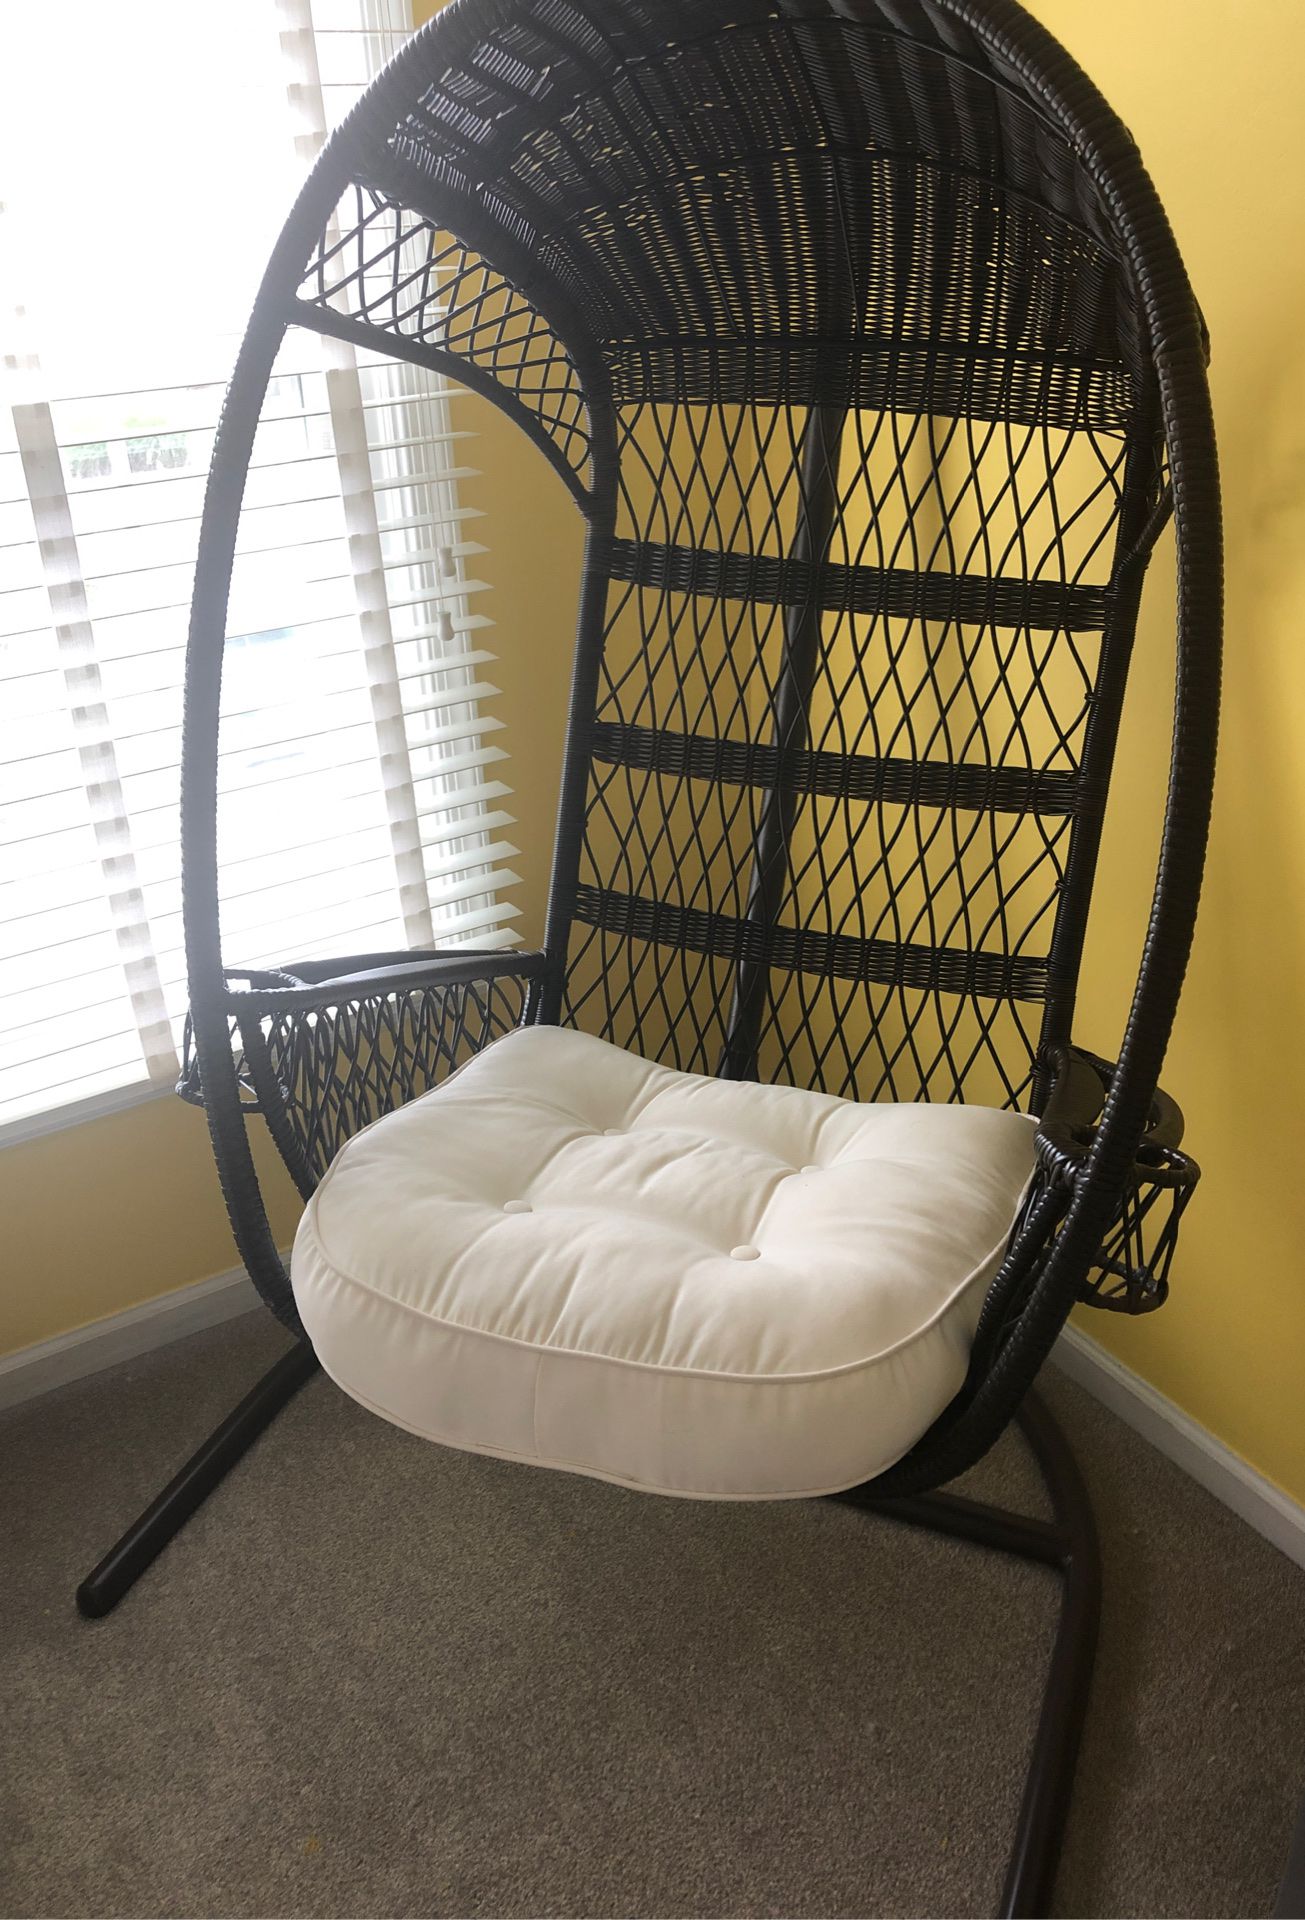 Pier 1 Imports Hanging Chair